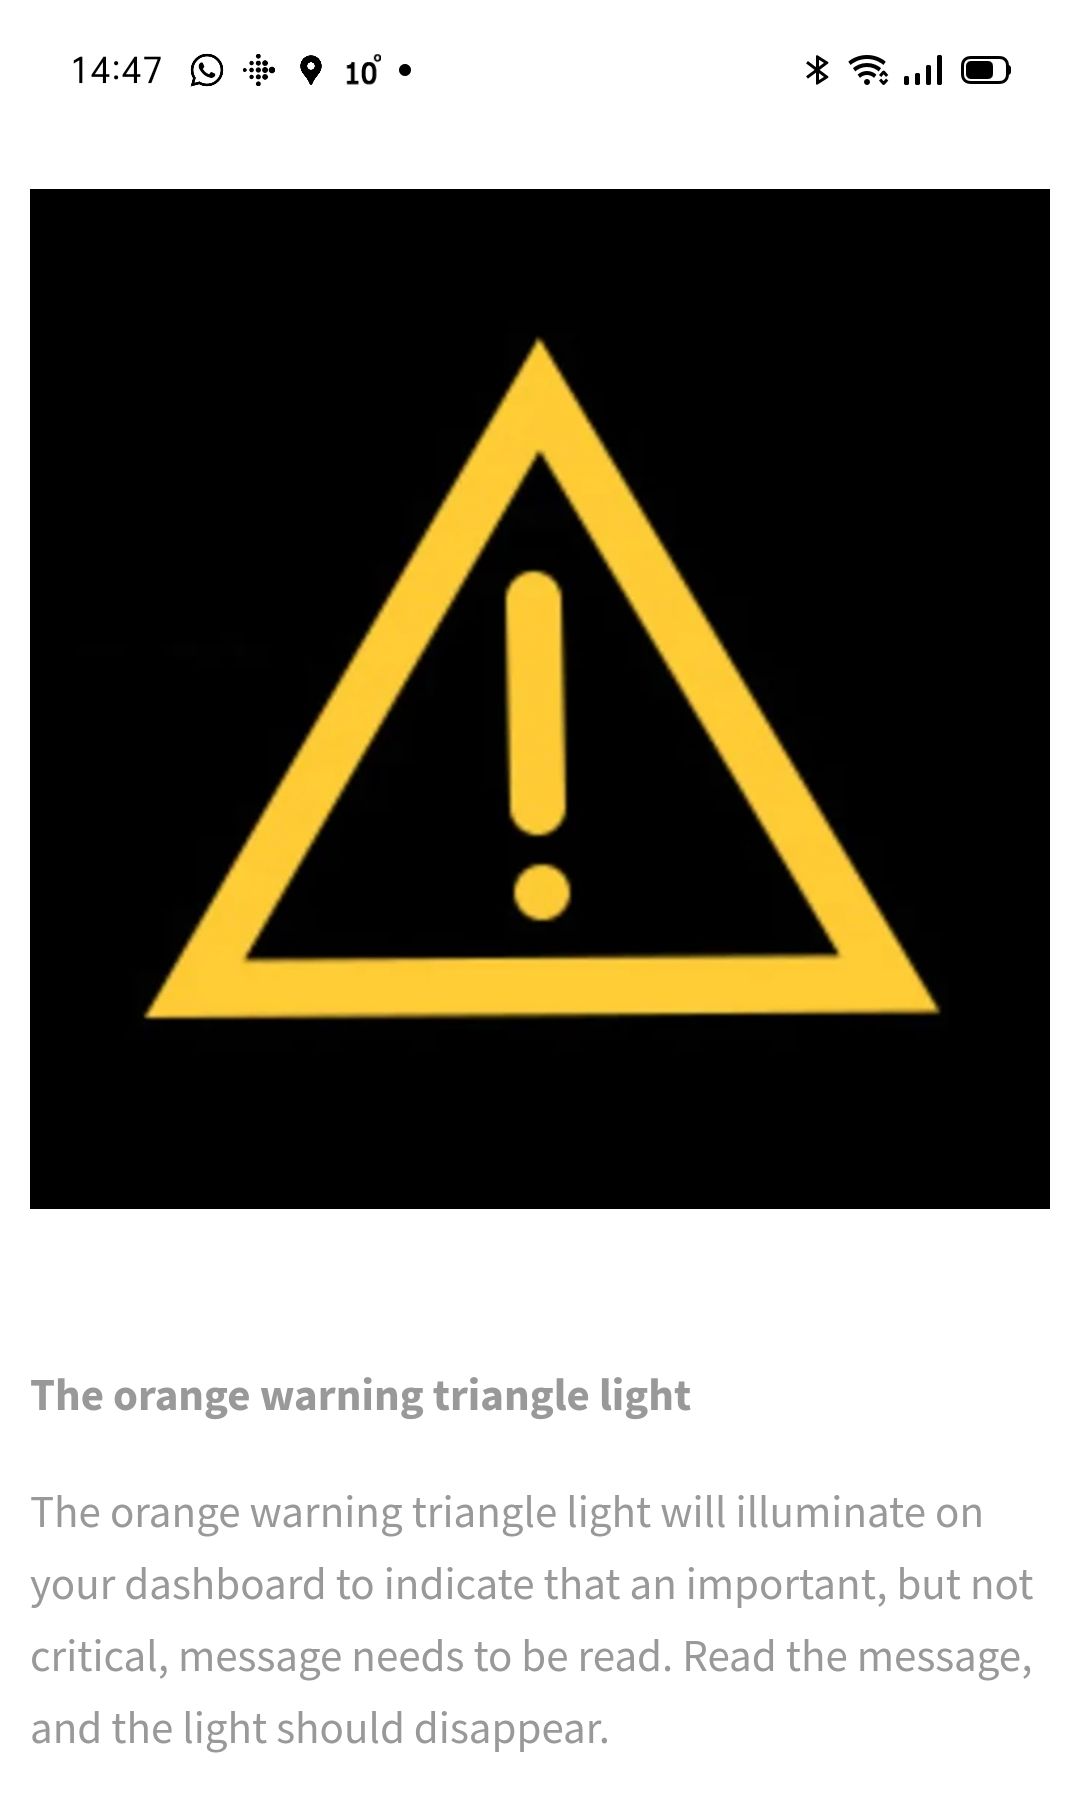 yellow triangle exclamation mark